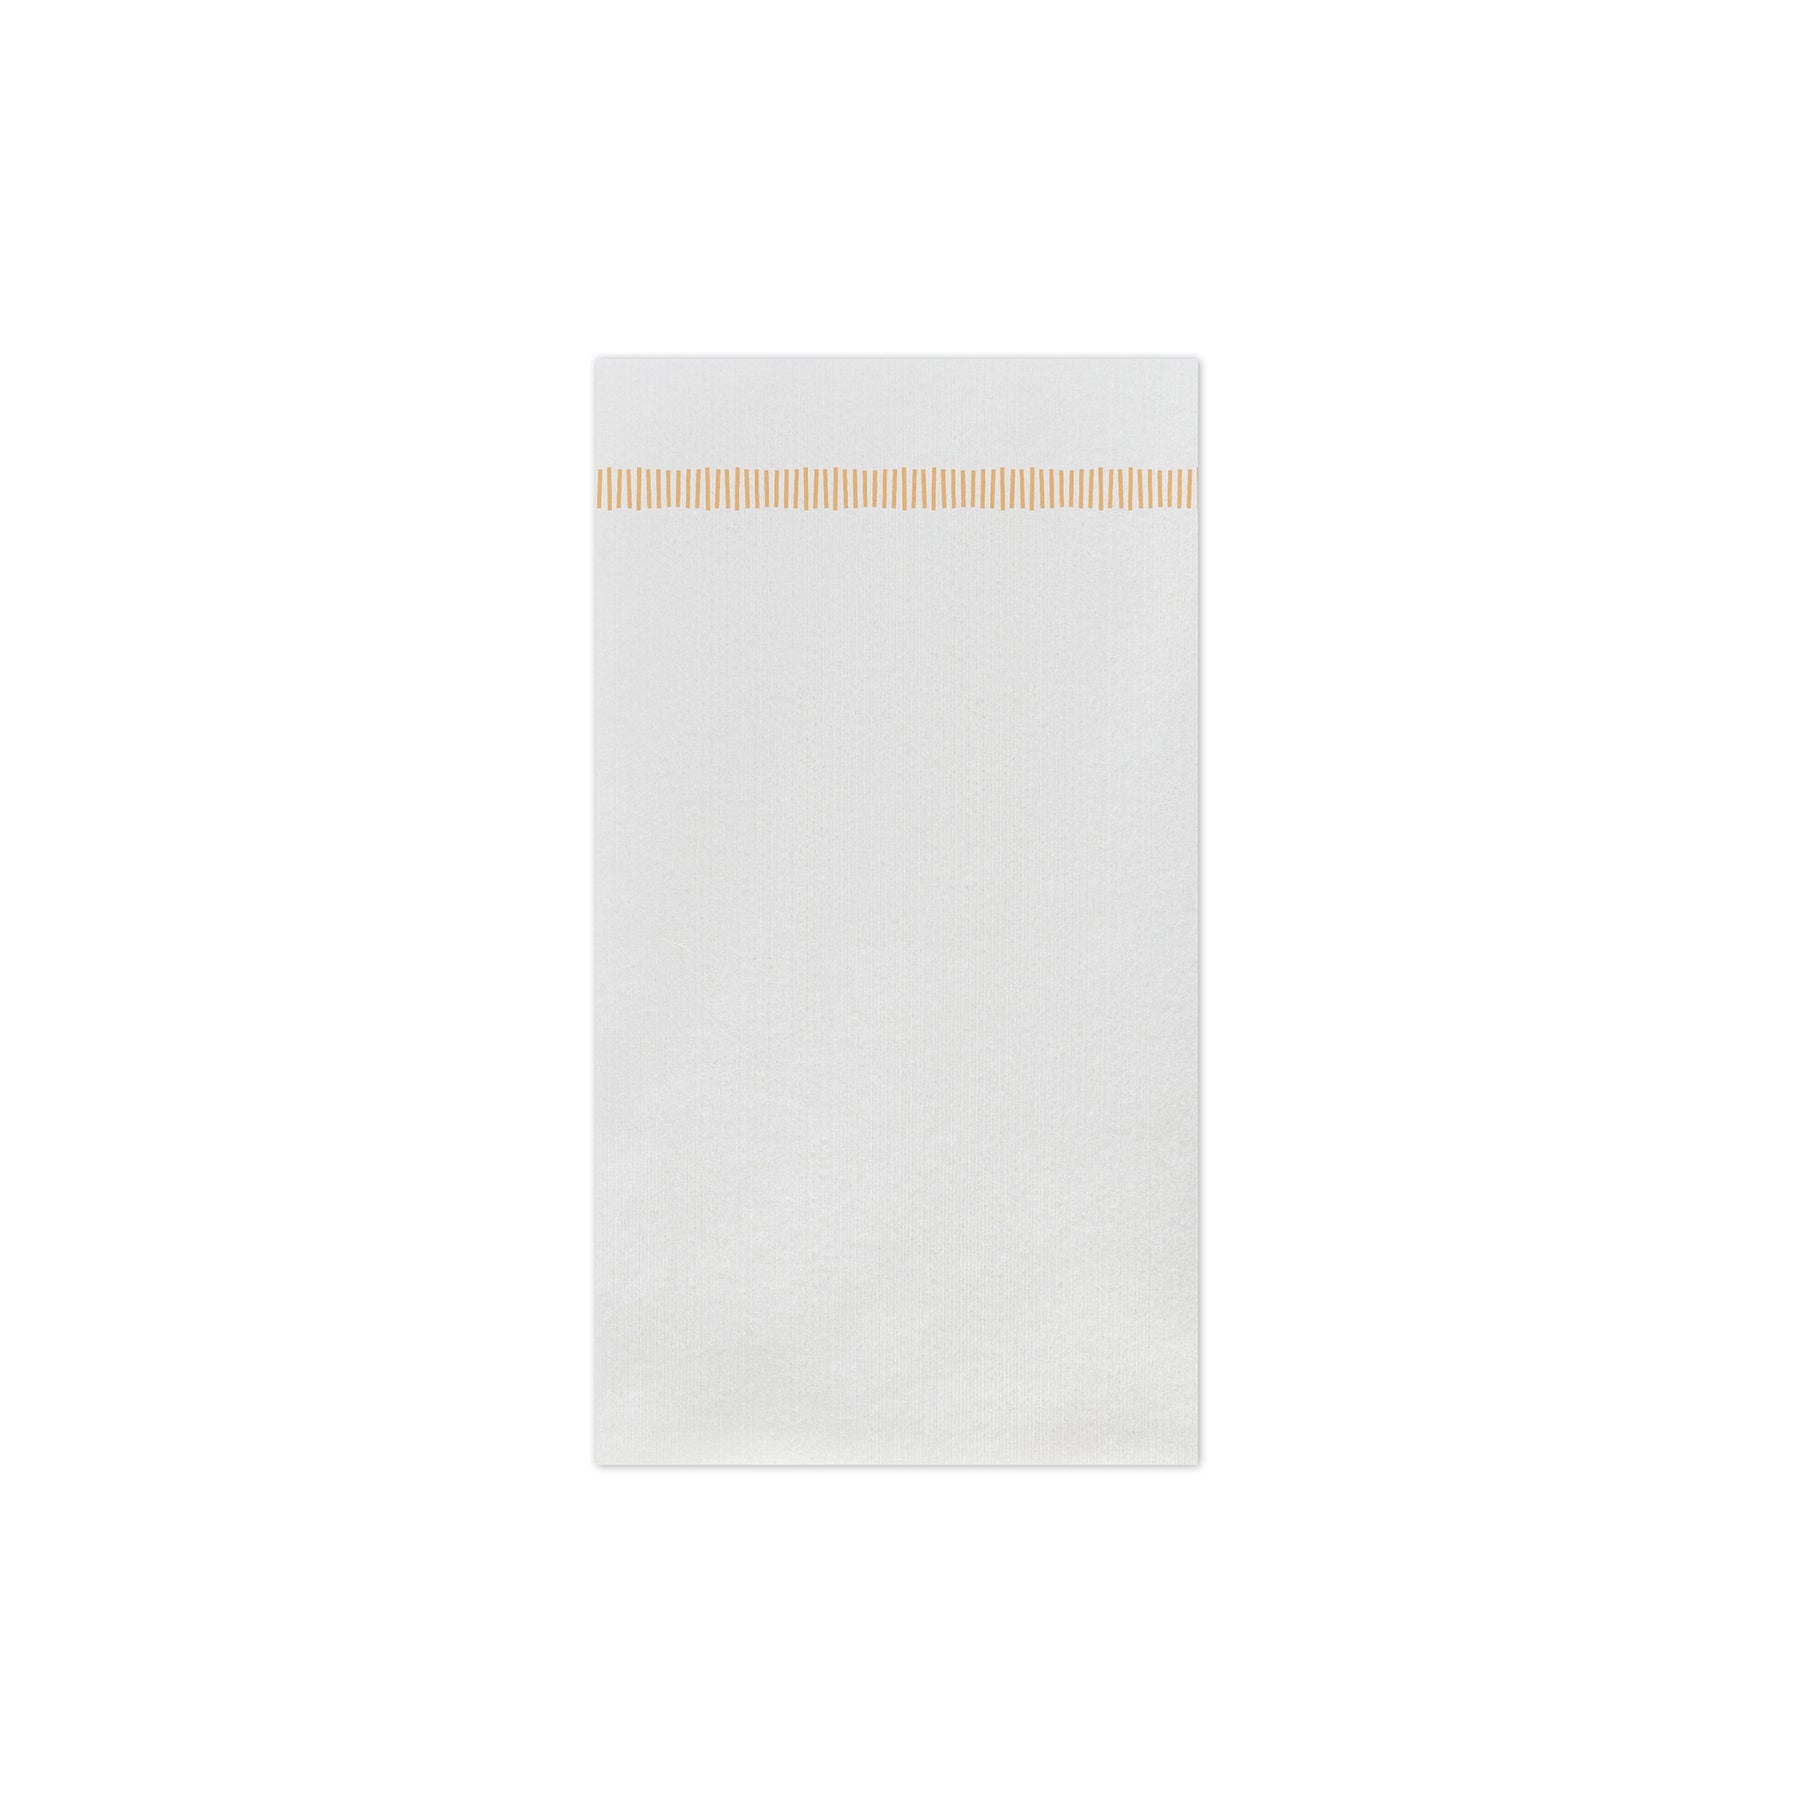 Papersoft Napkins Fringe Yellow Guest Towels